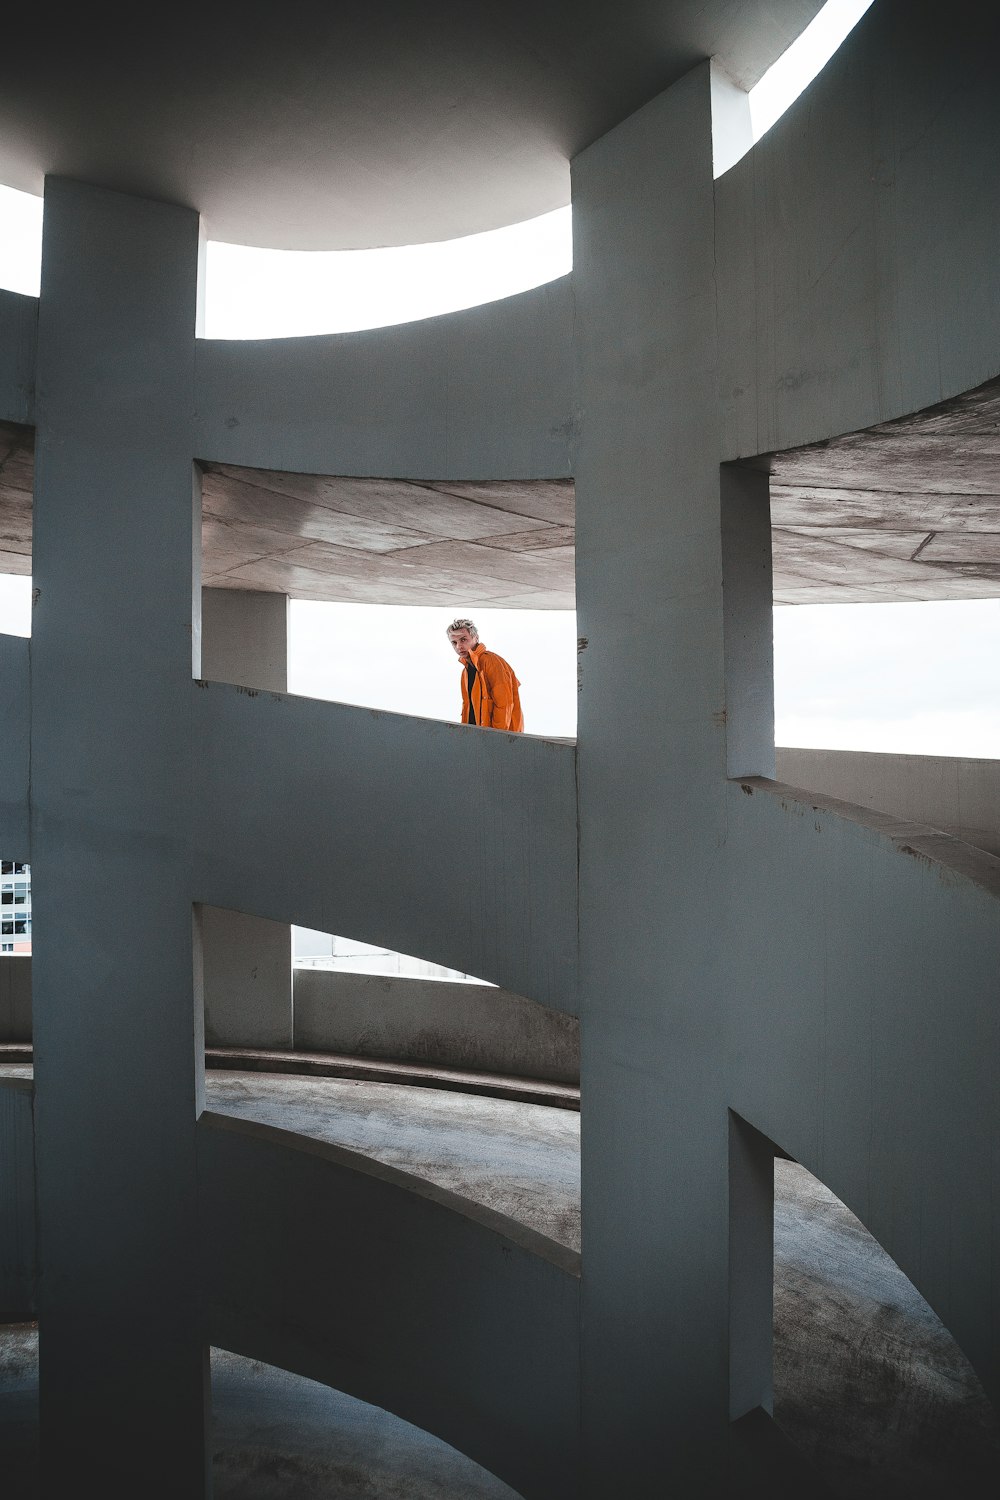 a man in an orange jacket standing in a circular structure